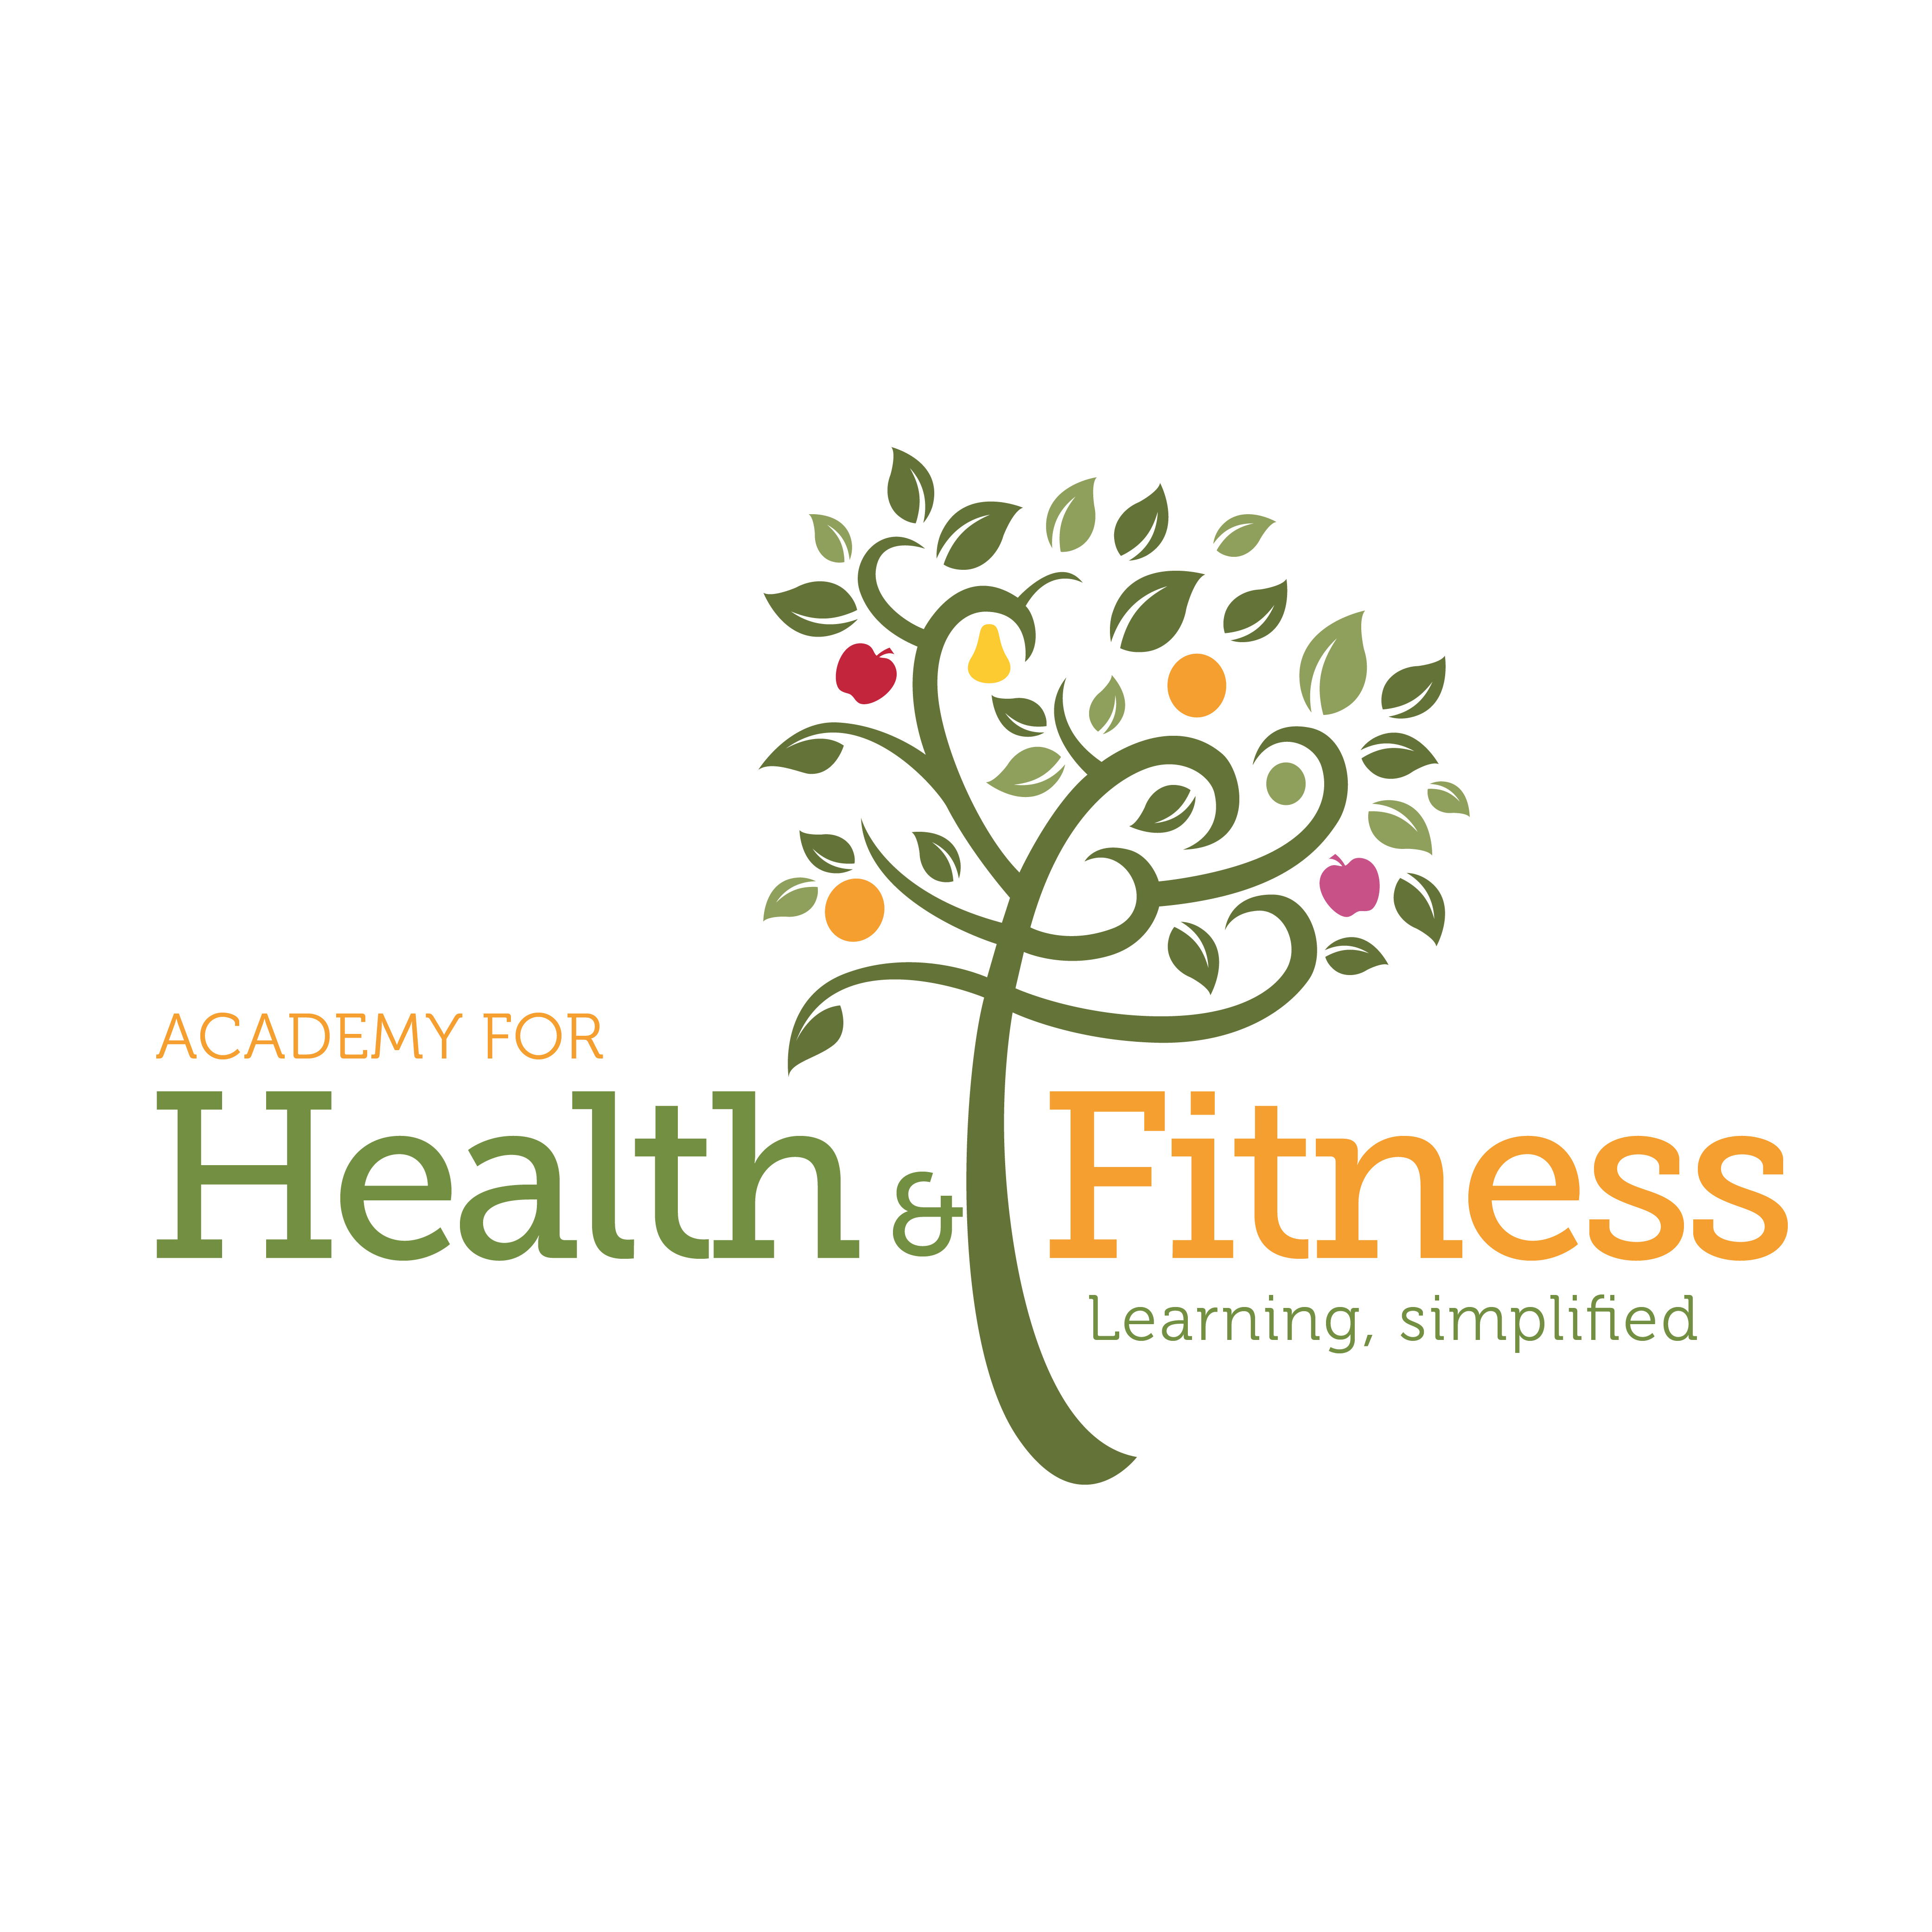 More about Academy for Health & Fitness